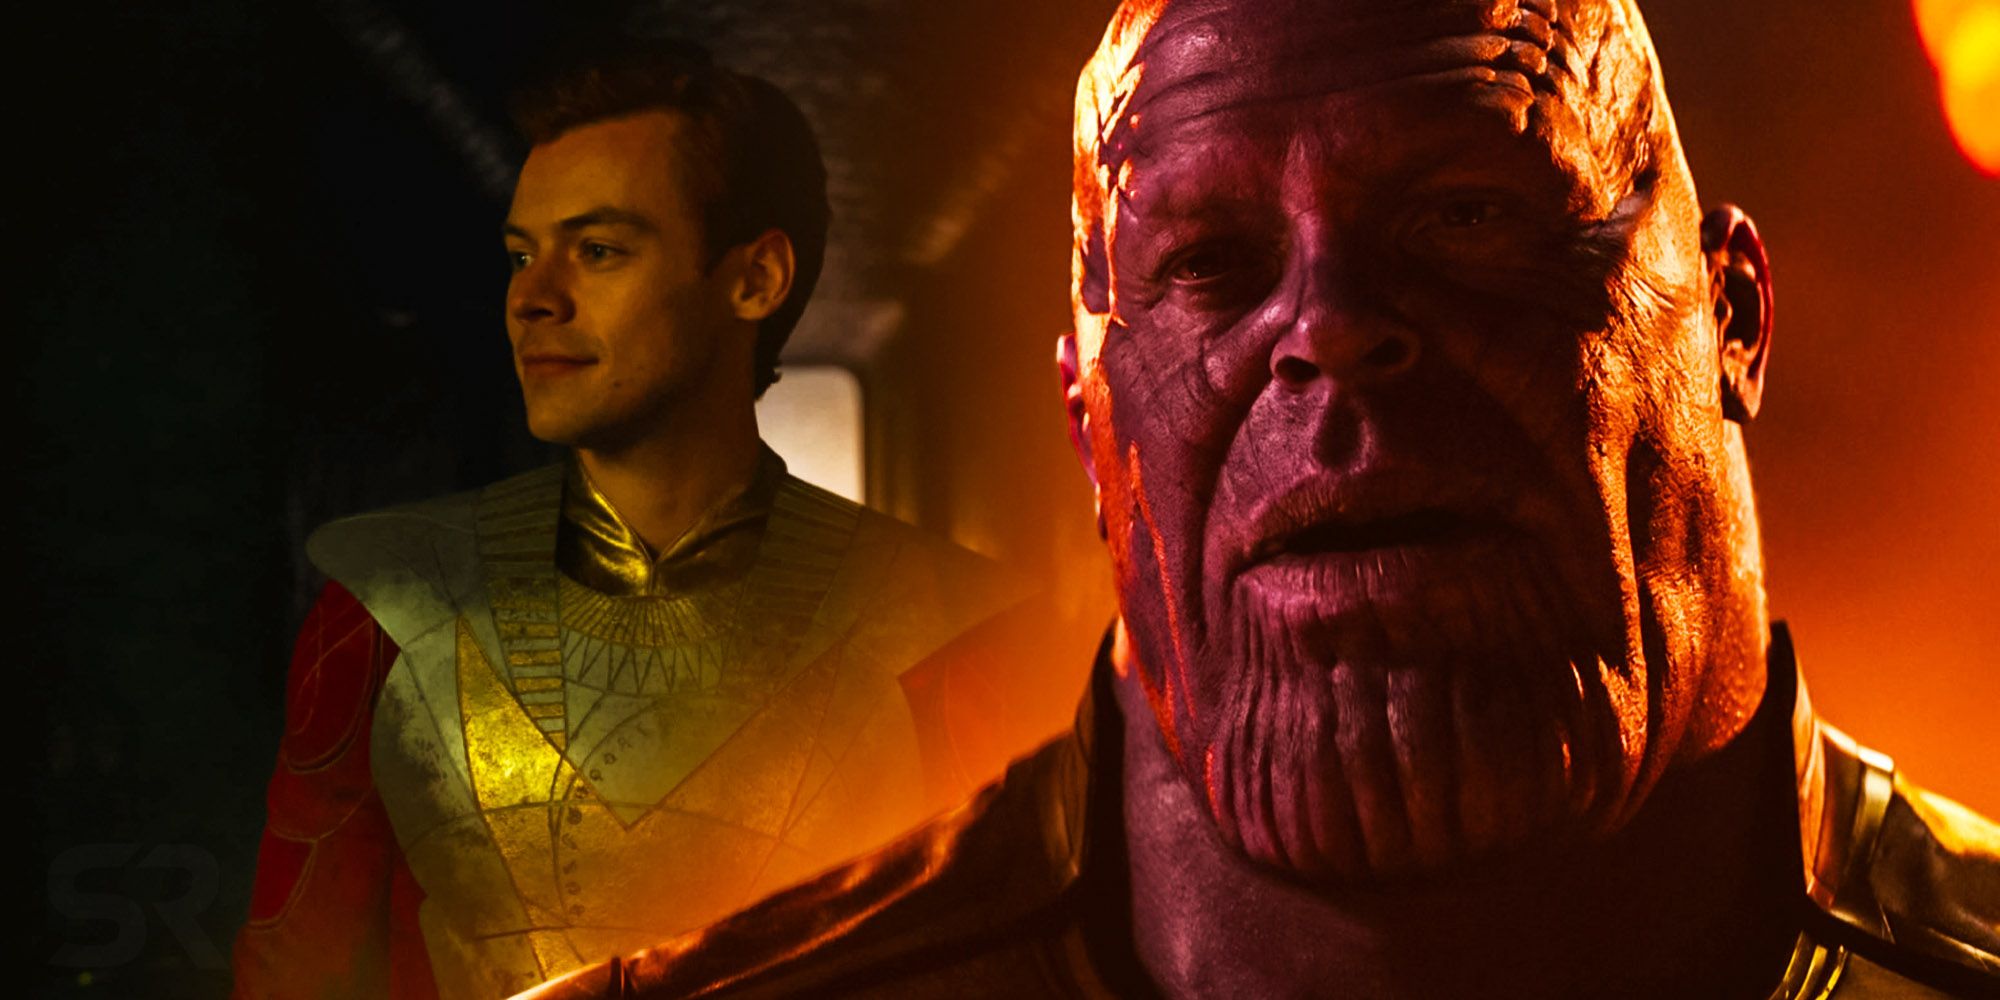 Marvel Stans Telugu on X: There were rumours that Harry Styles would make  his debut as 'Star Fox' (Thanos' brother) into MCU in one of the post  credit scenes of #Eternals. Keeping